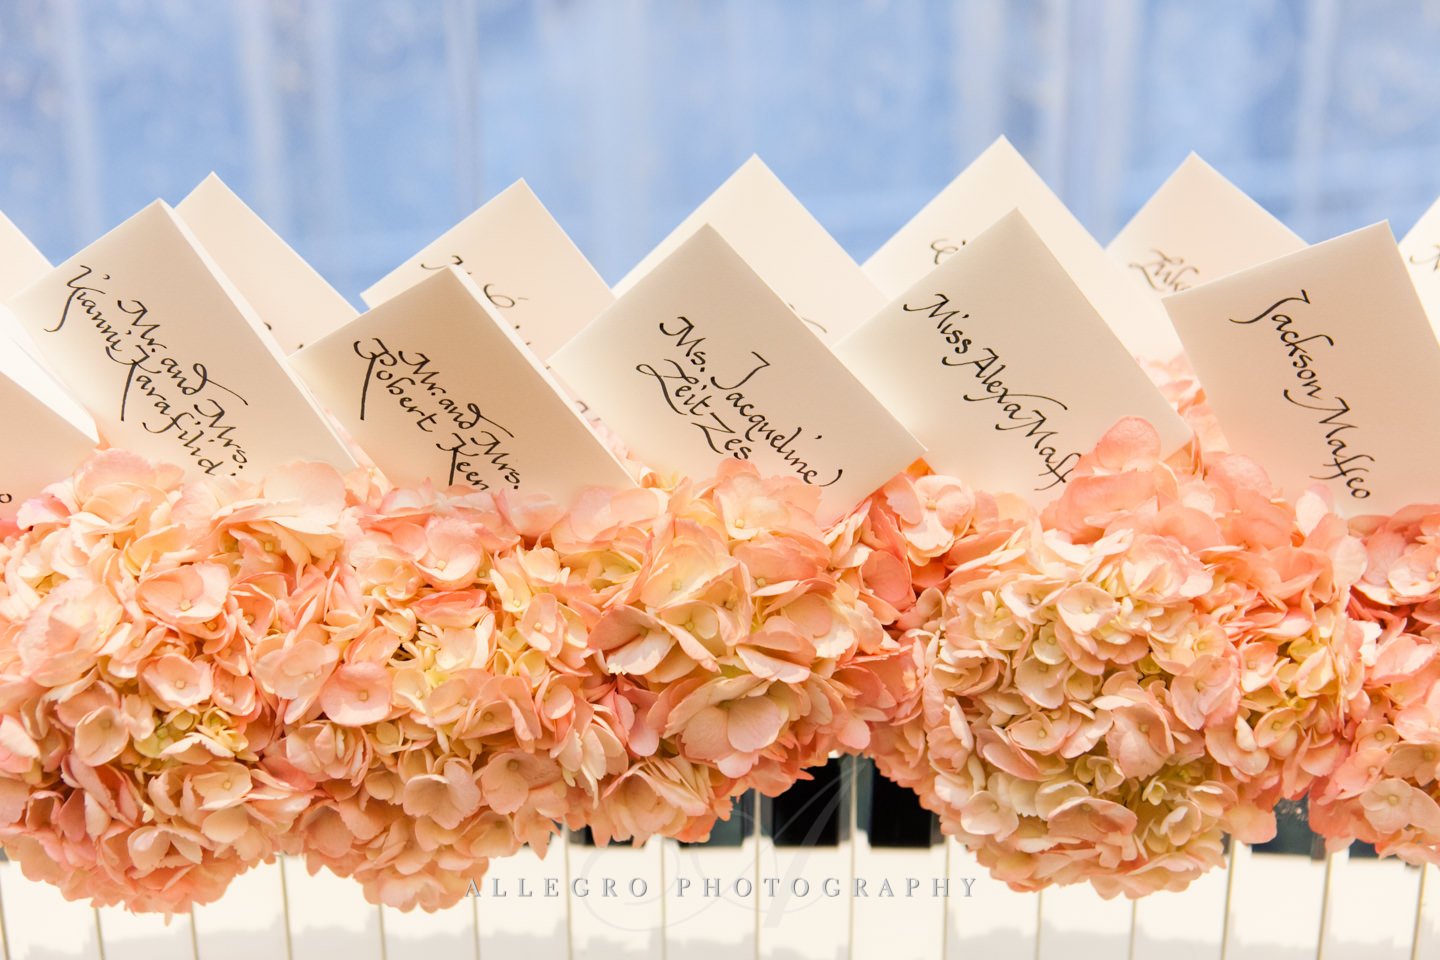 Escort card floral hedge by gregory costa st john at flou(-e)r- photo by allegro photography